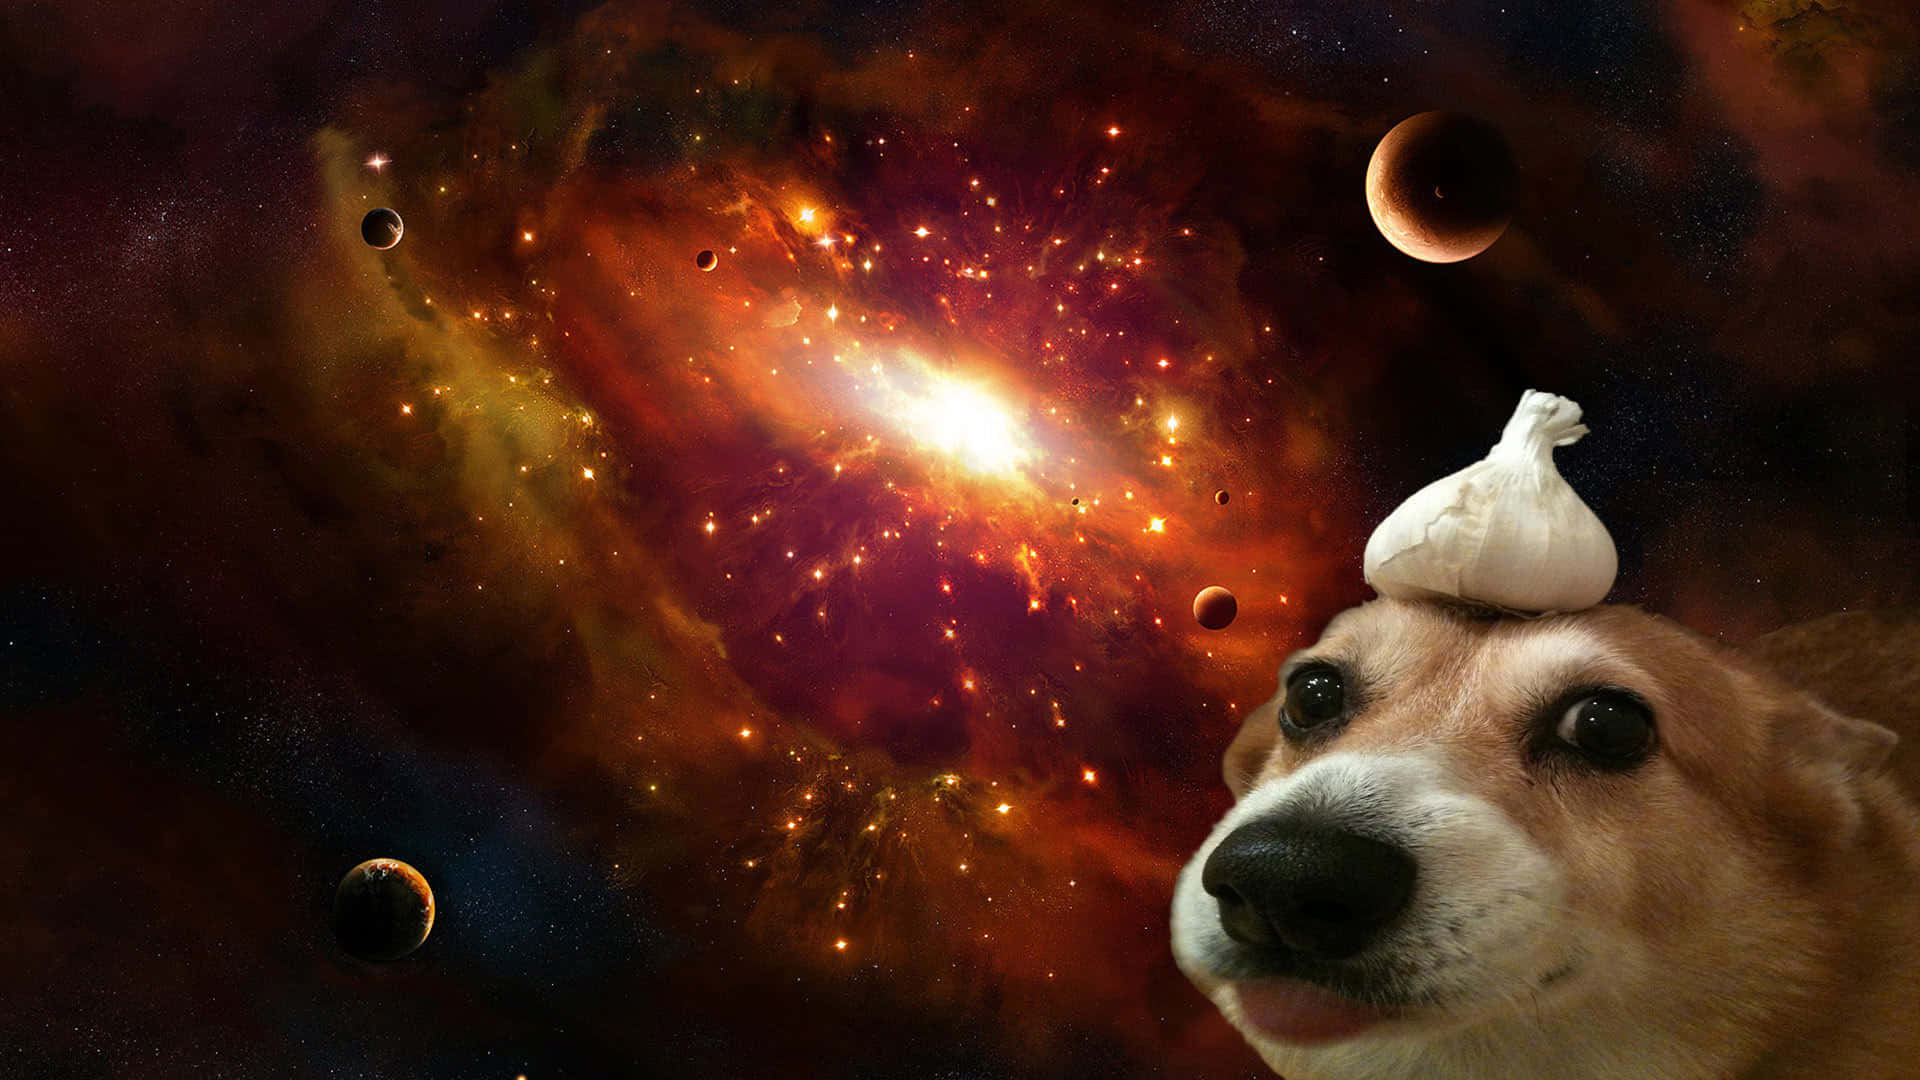 A Dog With A Garlic Head In Space